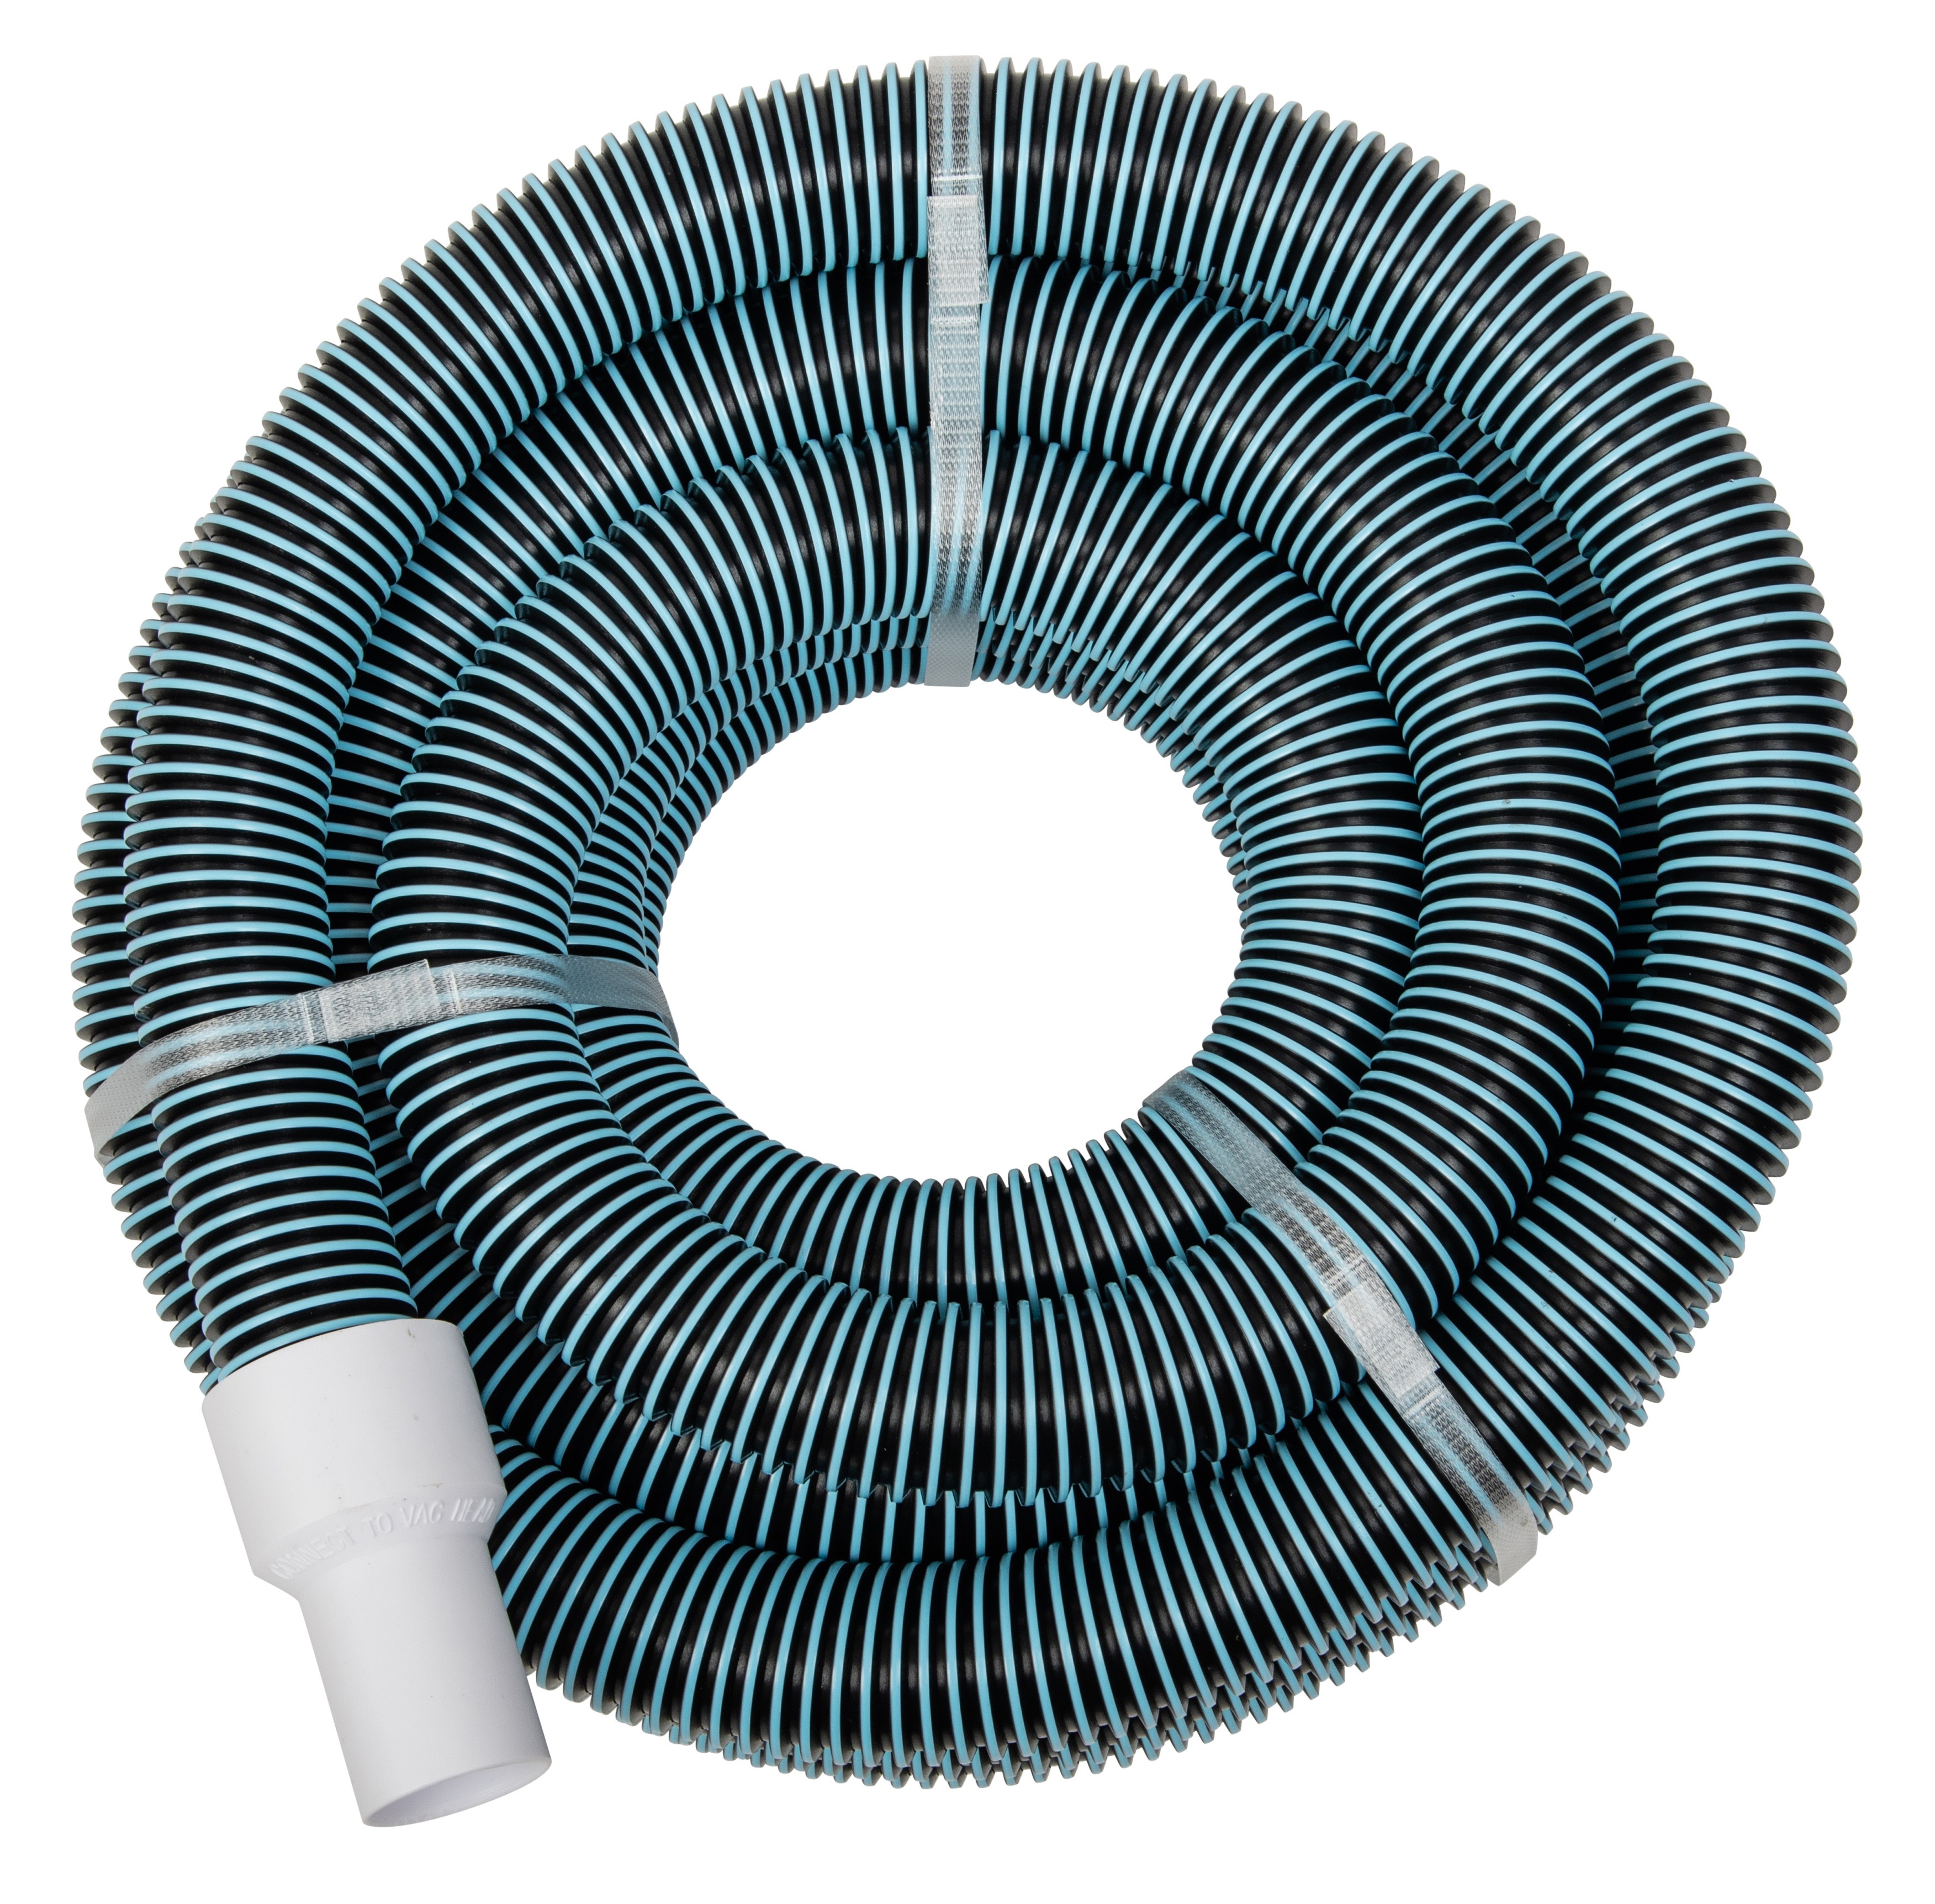 Swimming Pool Commercial Grade Vacuum Hose 1.5" - 35' length with Swivel End